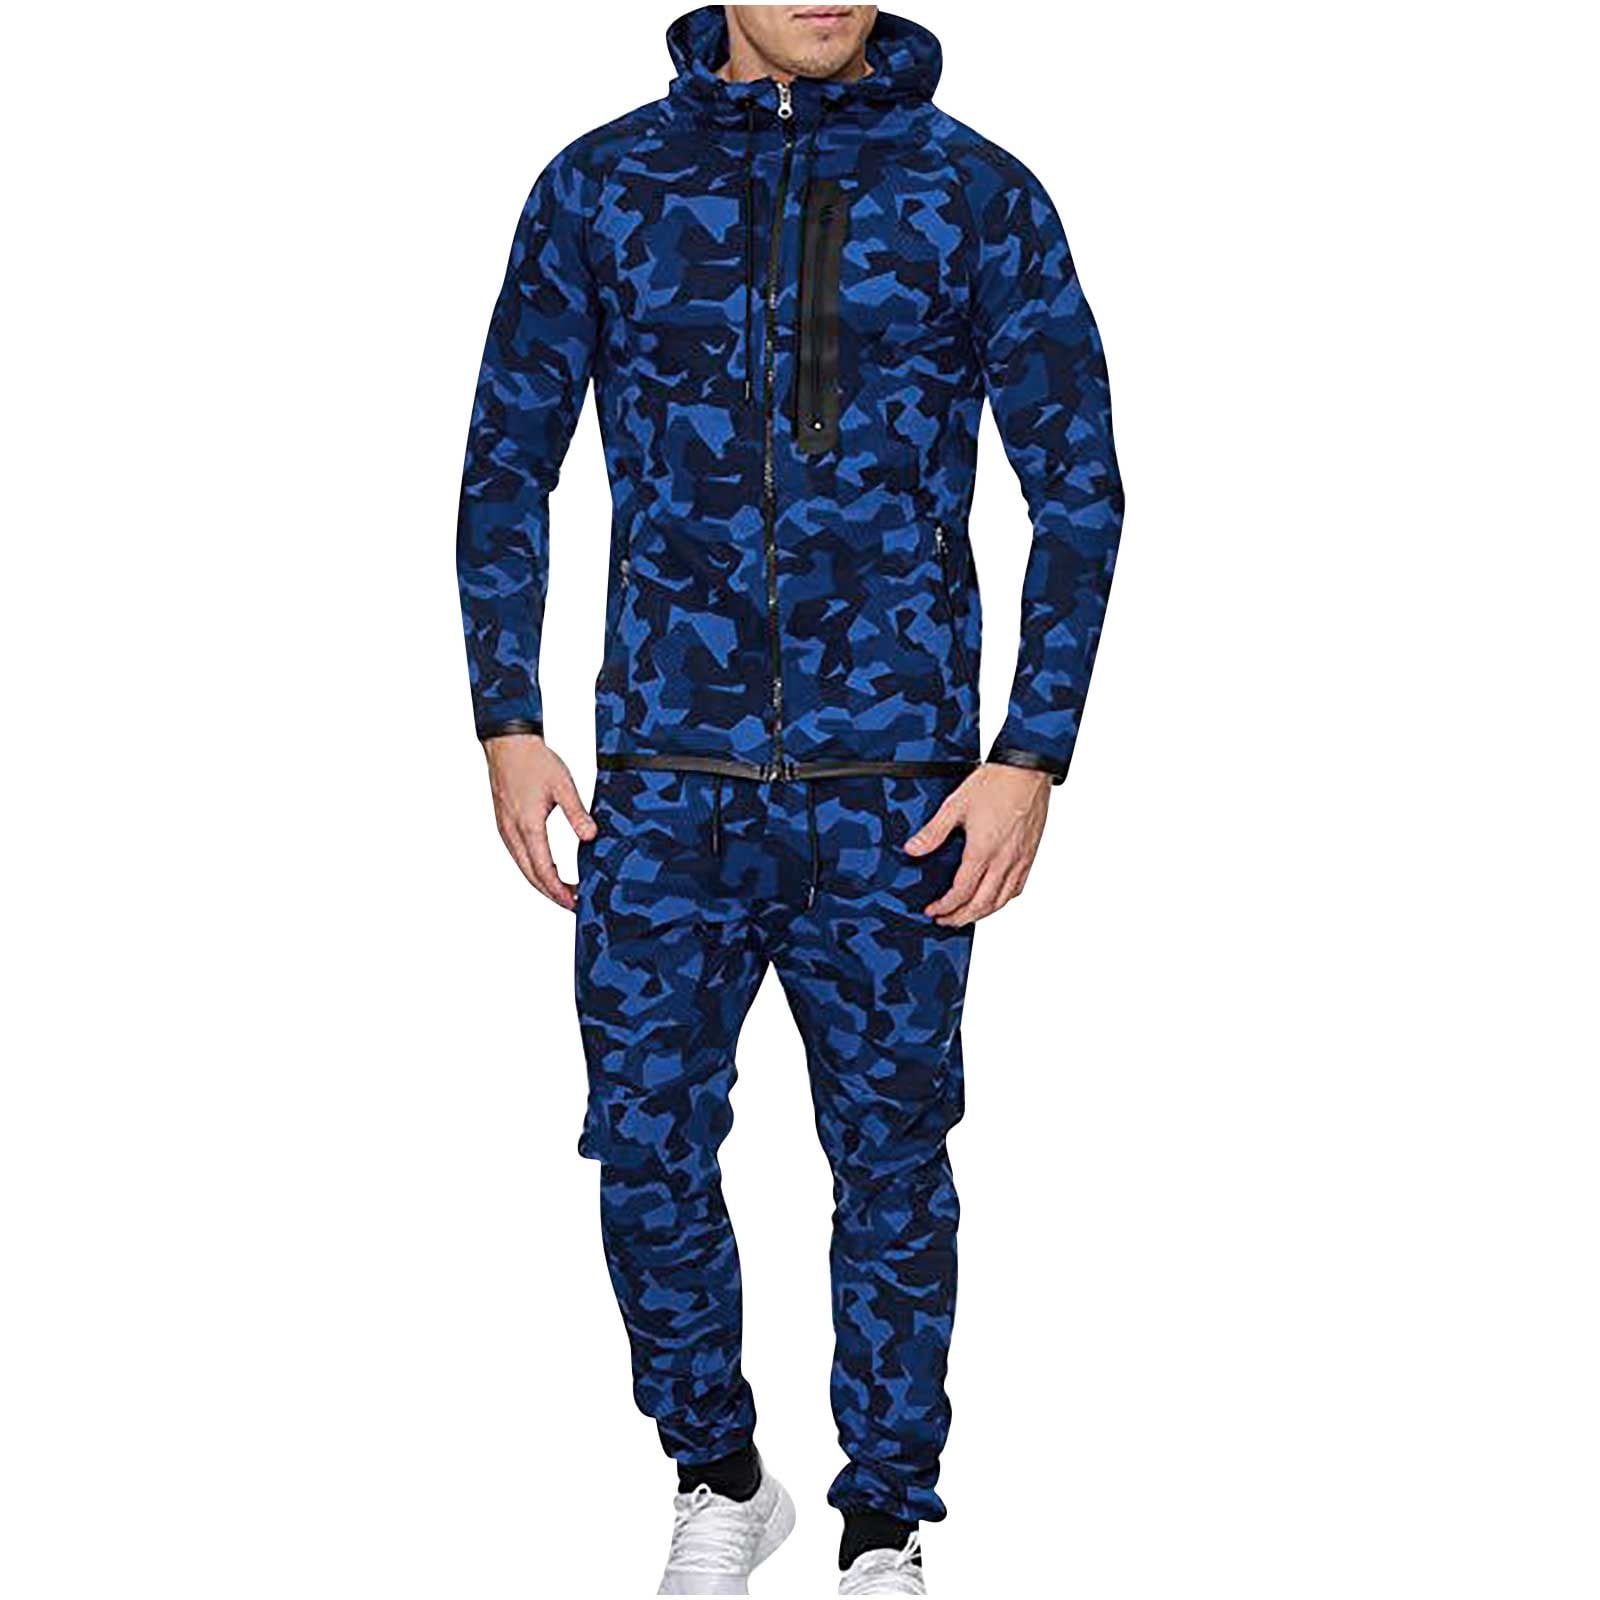 Edvintorg Men Sets Outfits 2 Piece Sweatpants Fashion Camouflage Casual ...